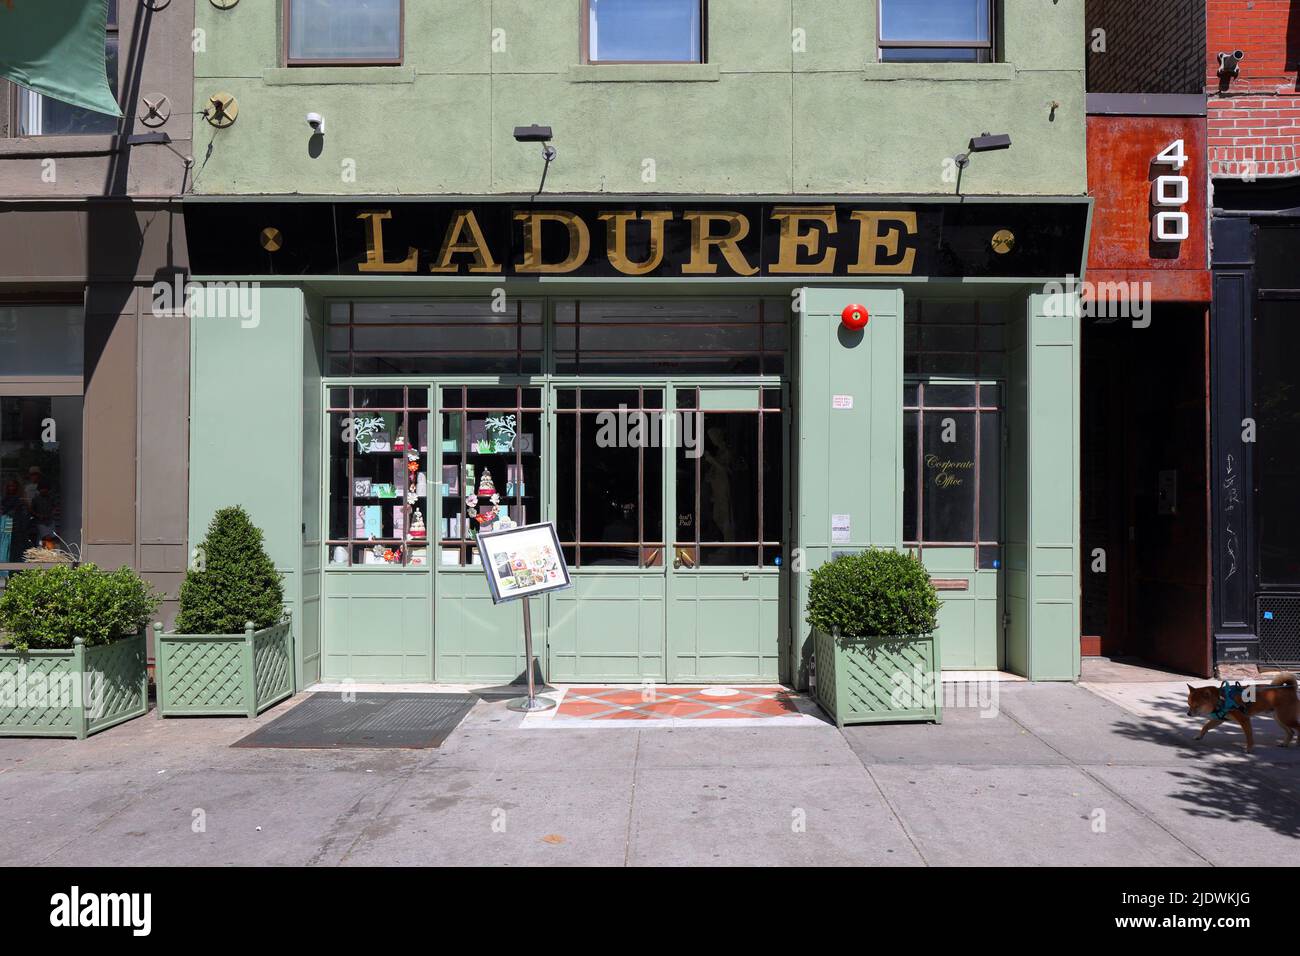 Ladurée, 398 West Broadway, New York, NYC storefront photo of a French patisserie famous for its macarons, and tea room in Manhattan's Tribeca. Stock Photo